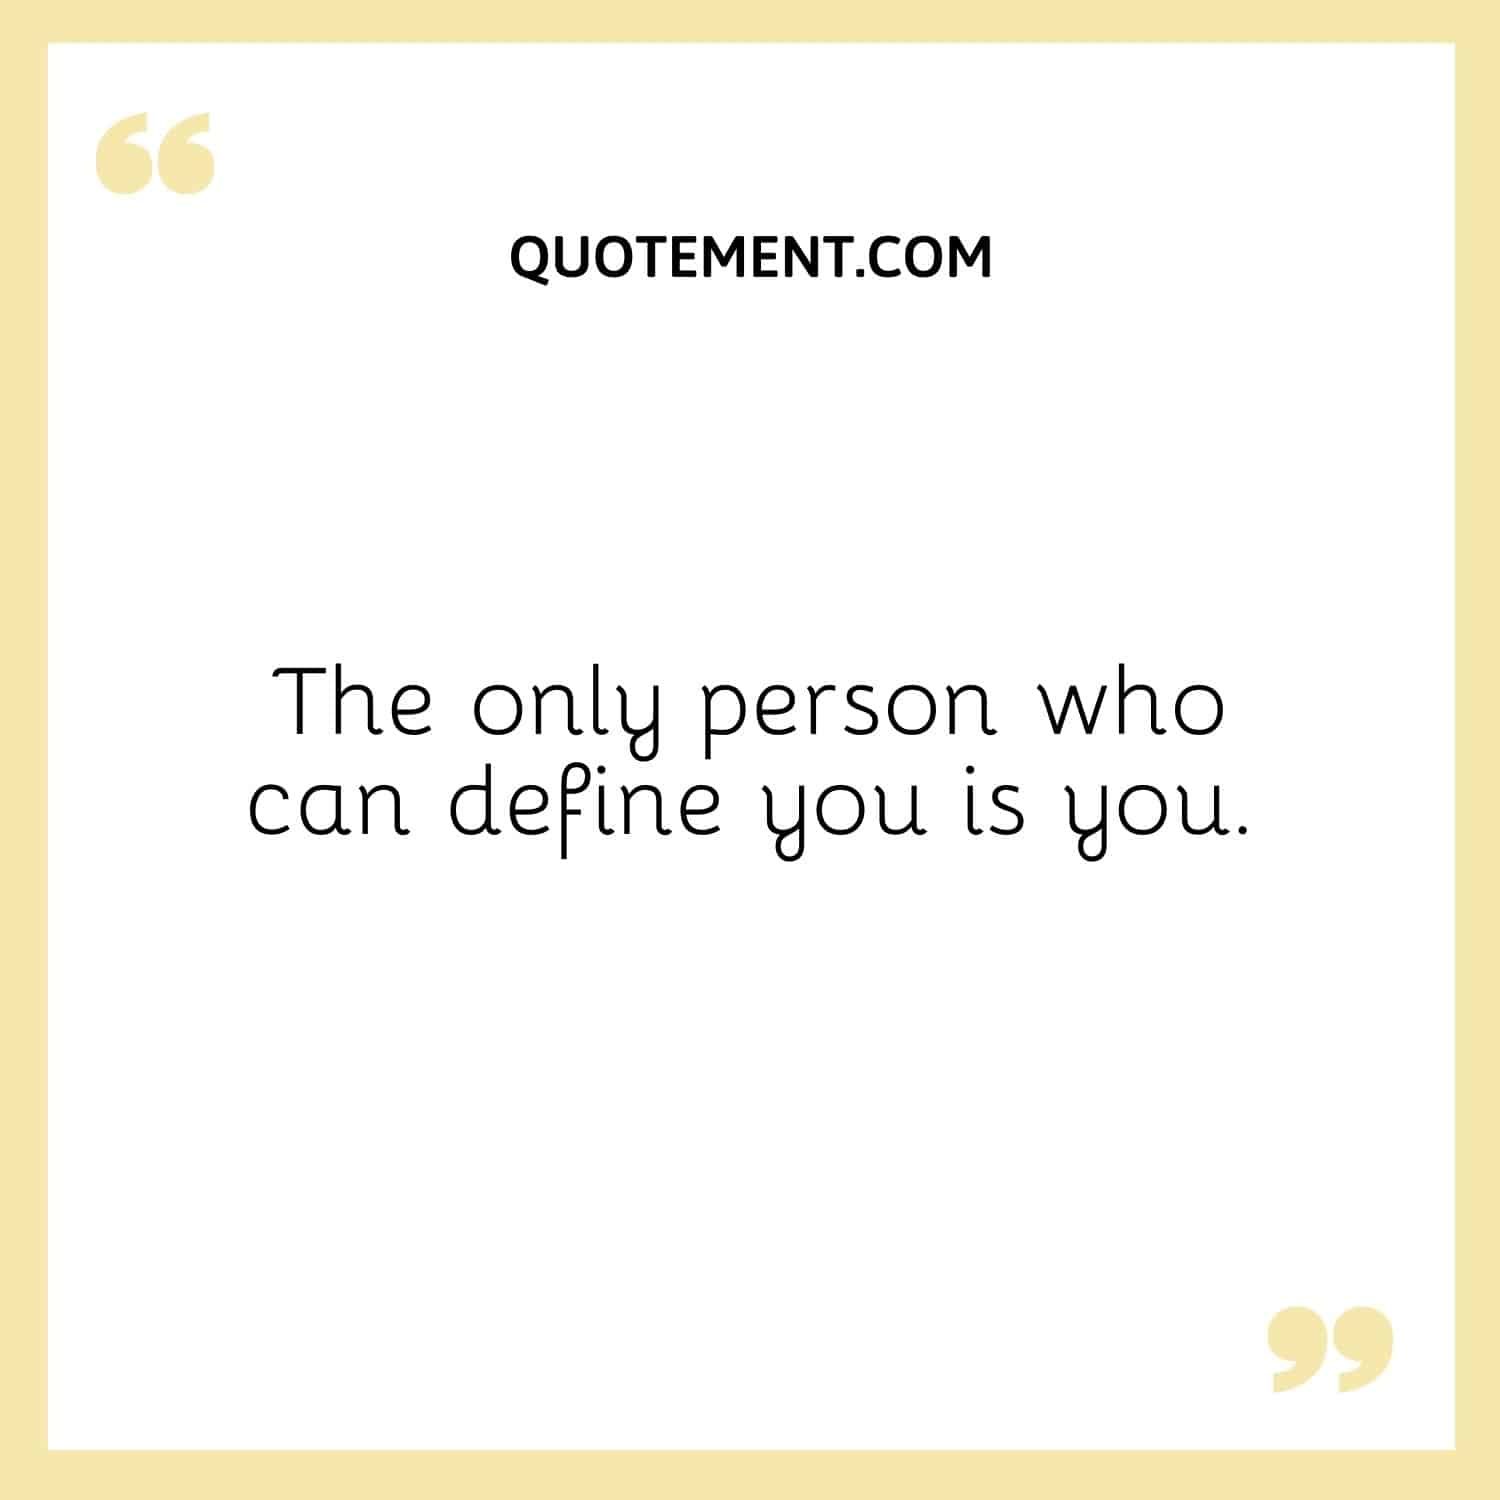 The only person who can define you is you.